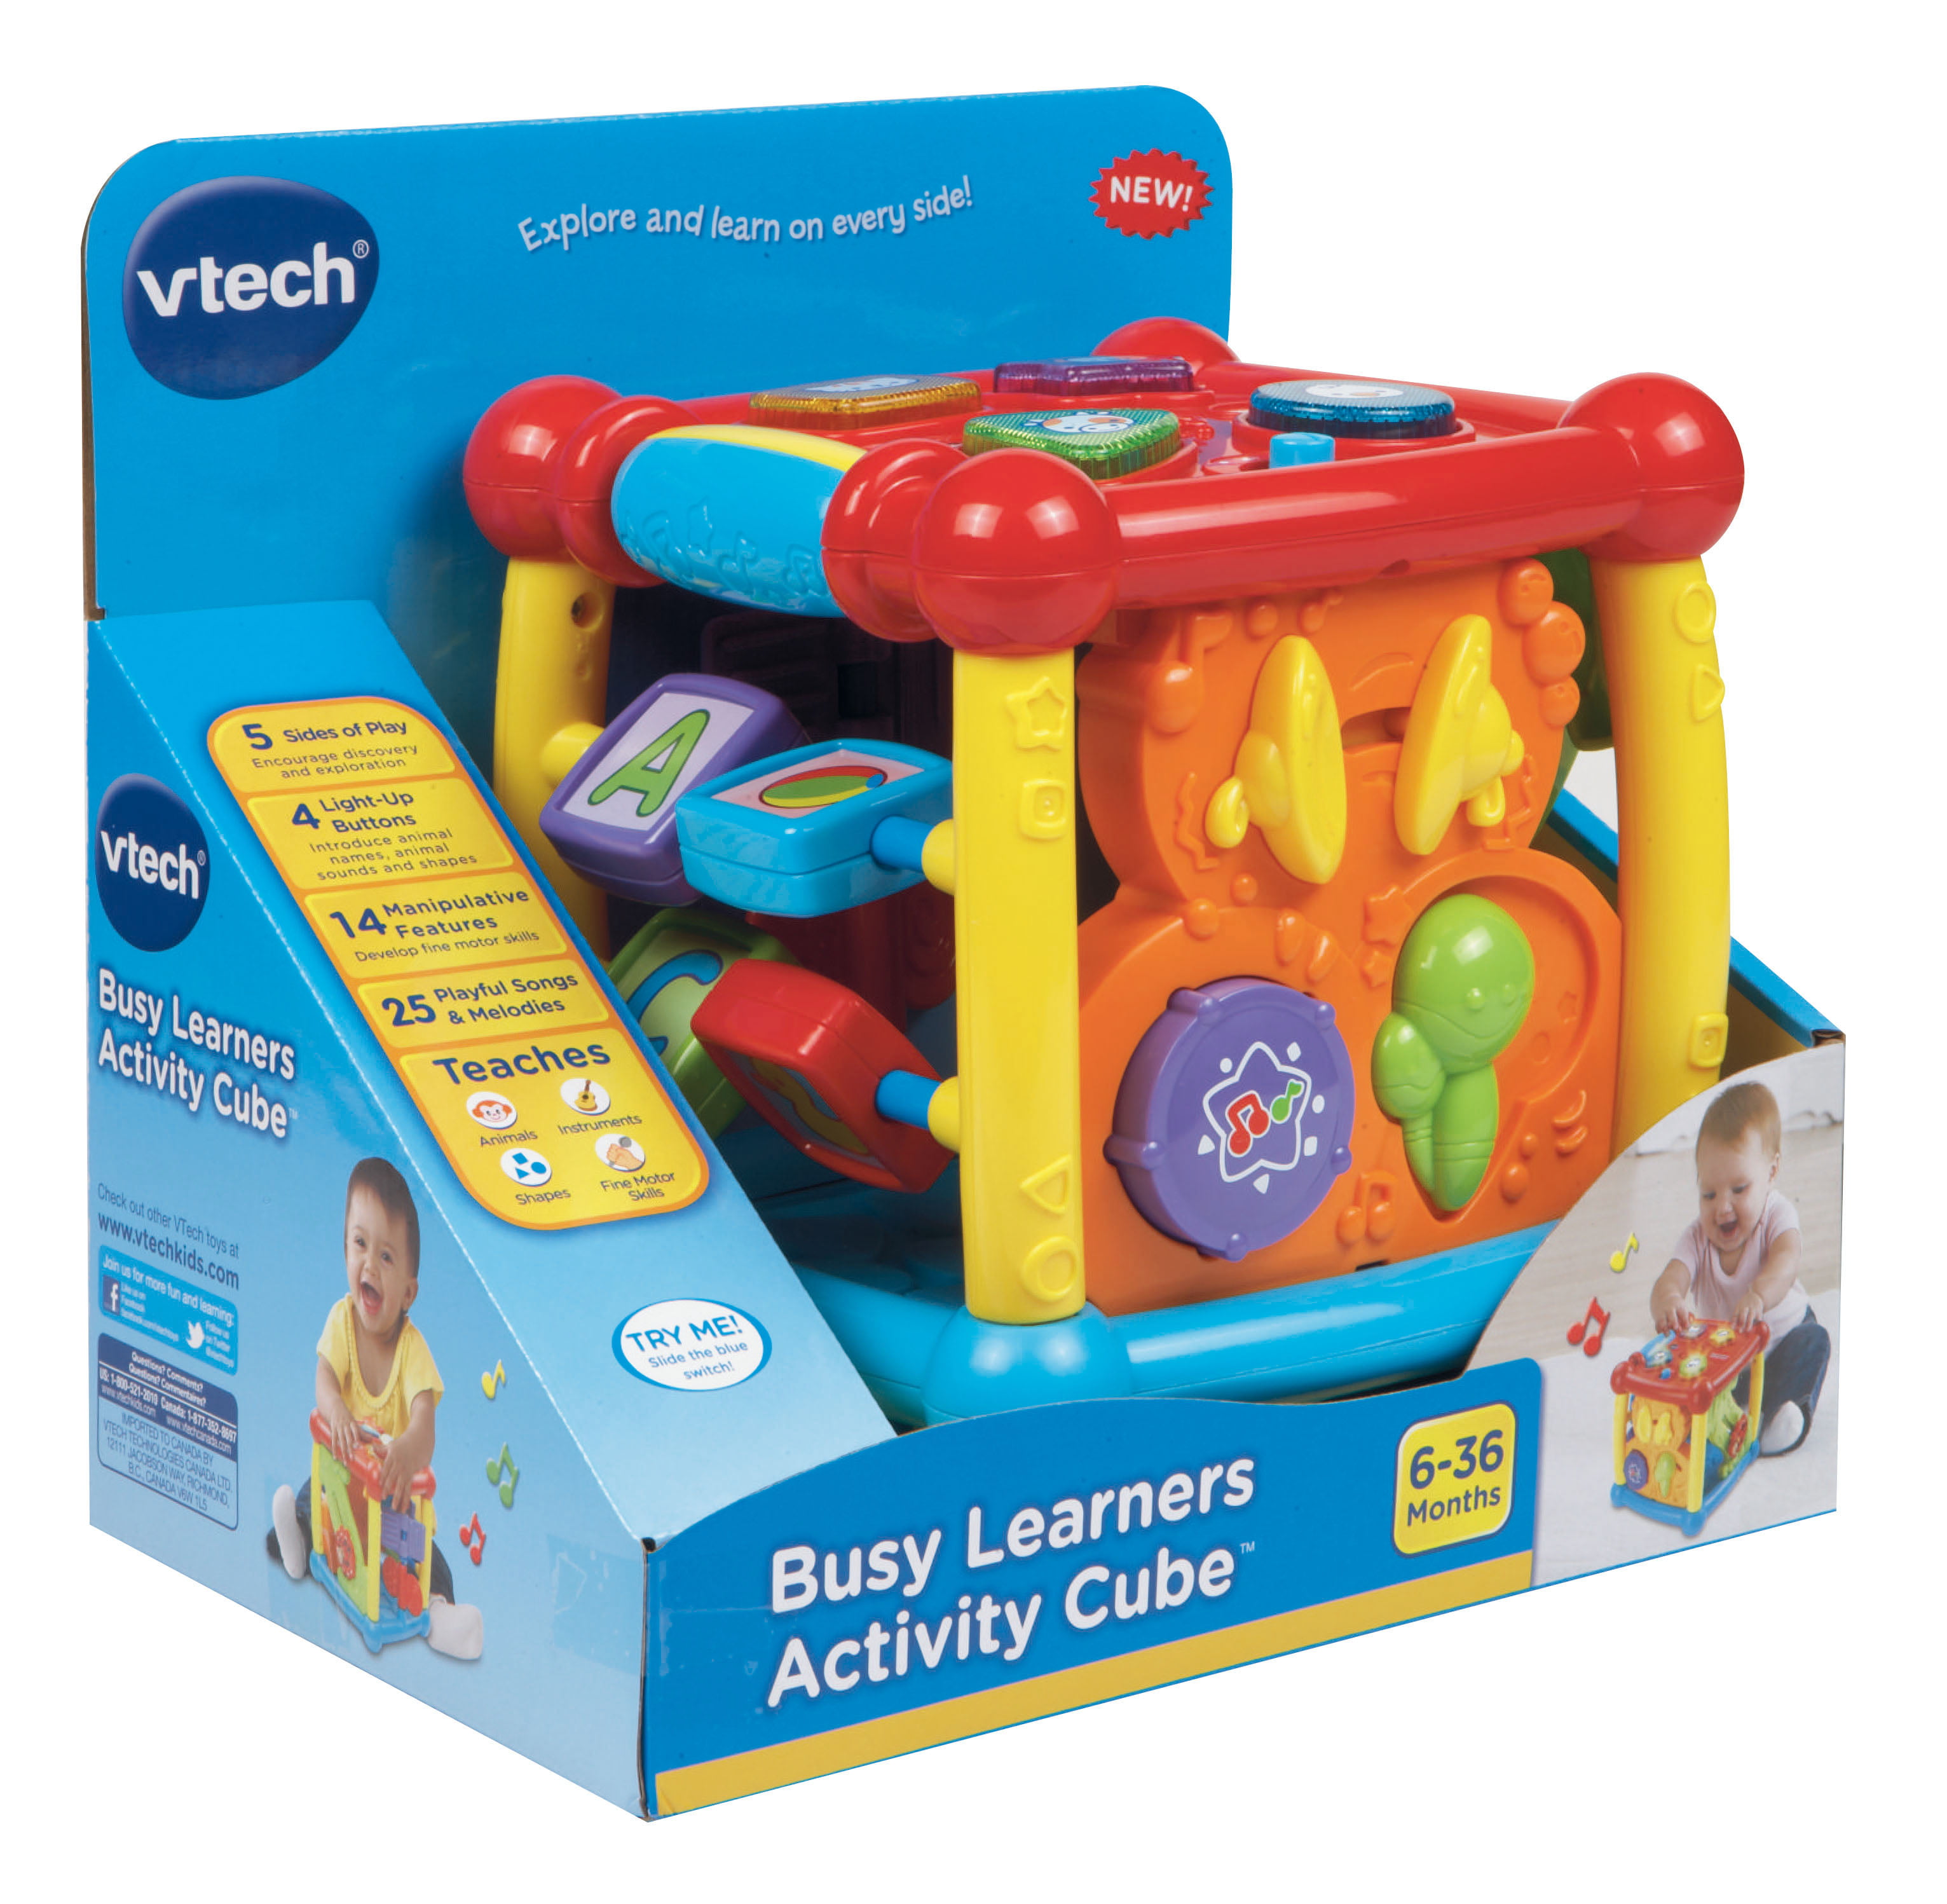 vtech baby turn and learn cube